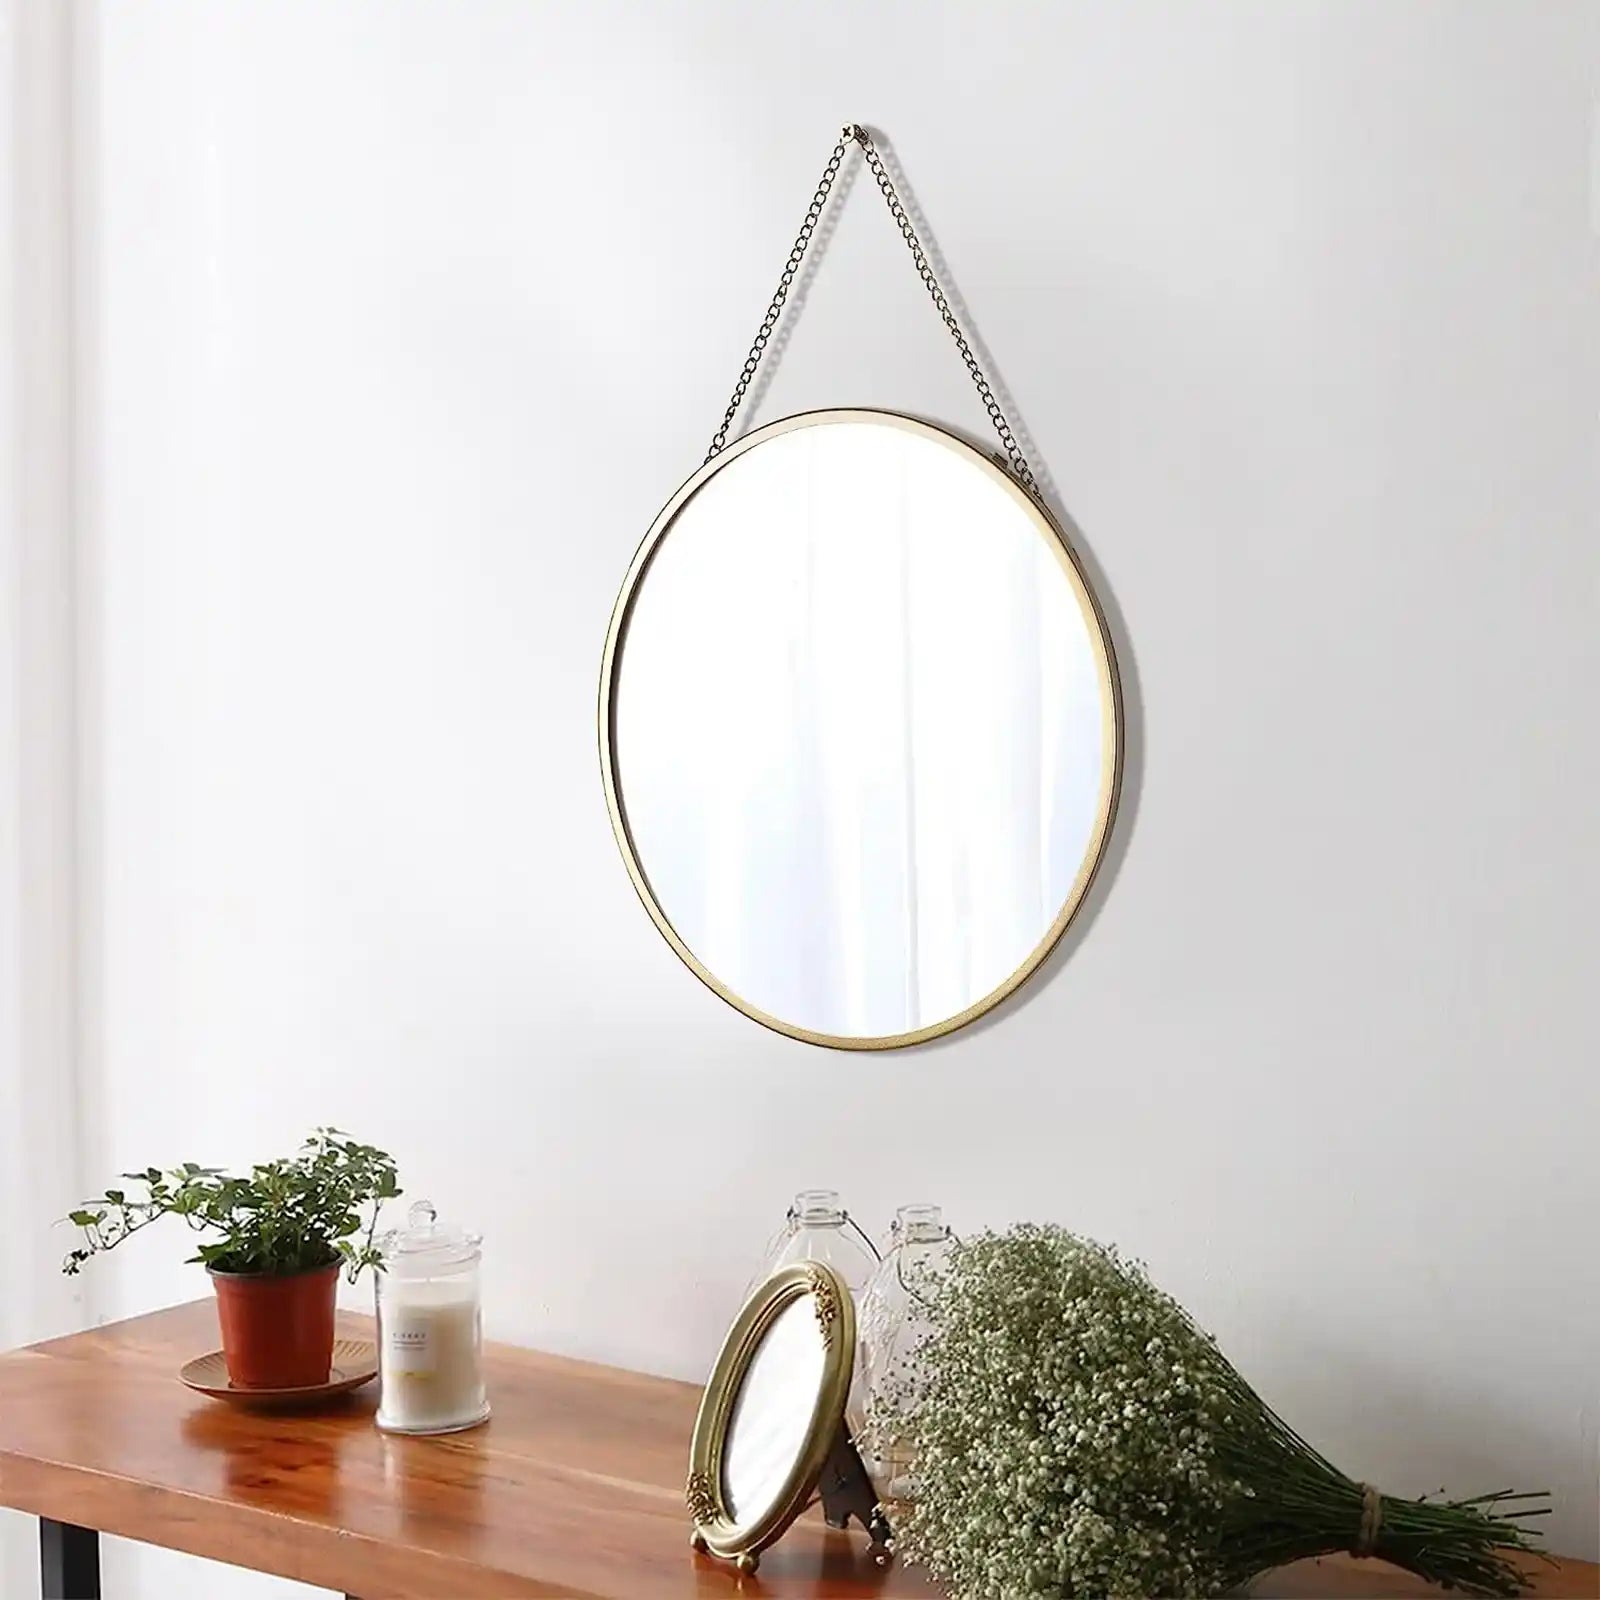 Hanging Circle Mirror Wall Decor Gold Round Mirror with Hanging Chain for Bathroom, Bedroom, Vanity, Living Room, Entryway